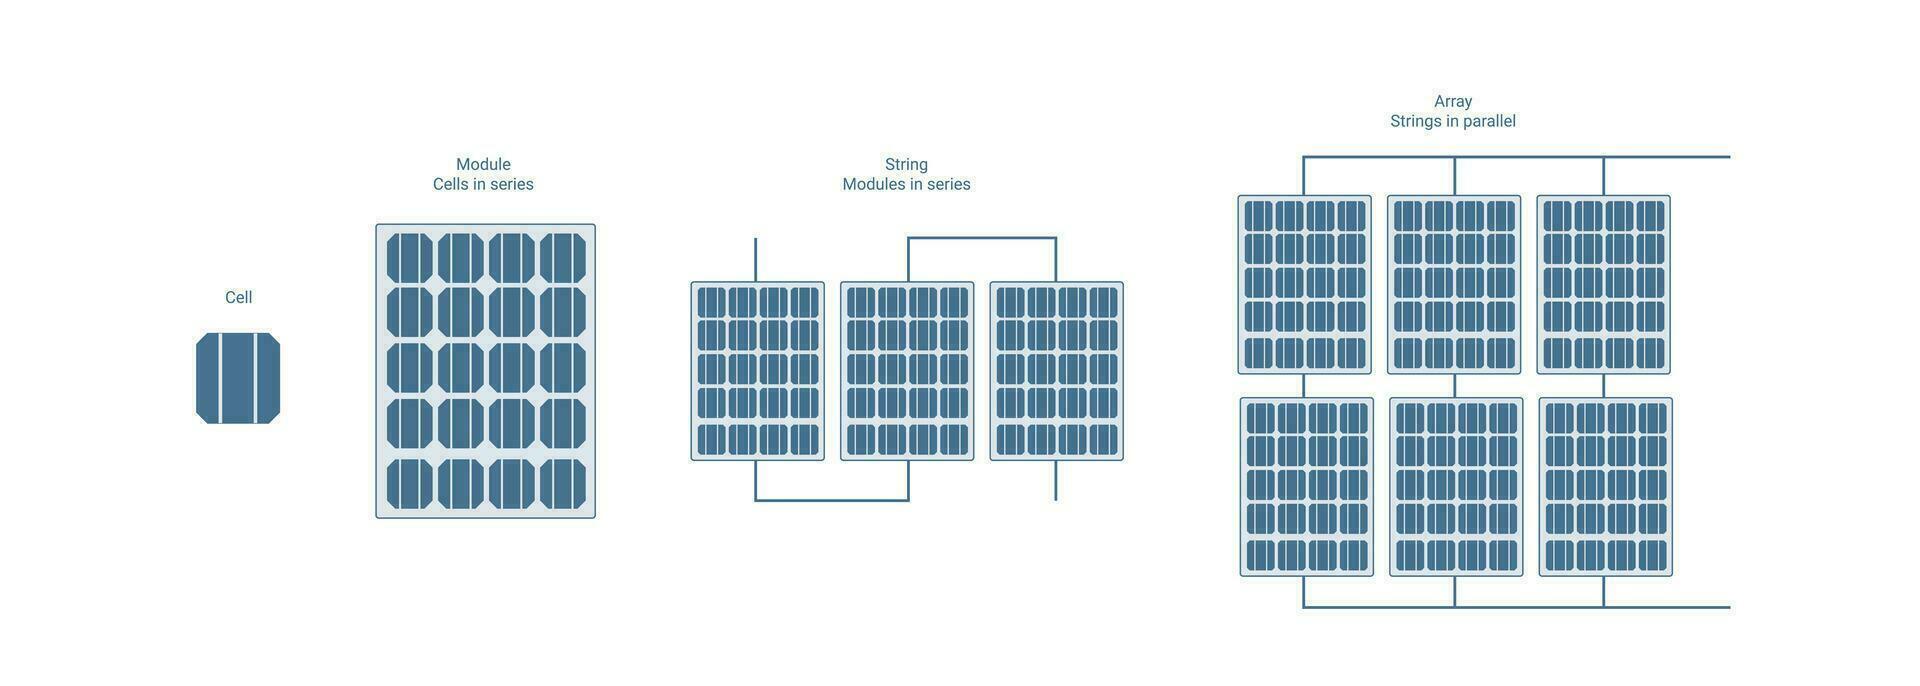 Pv cell. Pv panel. Photovoltaic panels. Photovoltaic cells, solar energy panel, sustainable energy vector concept.